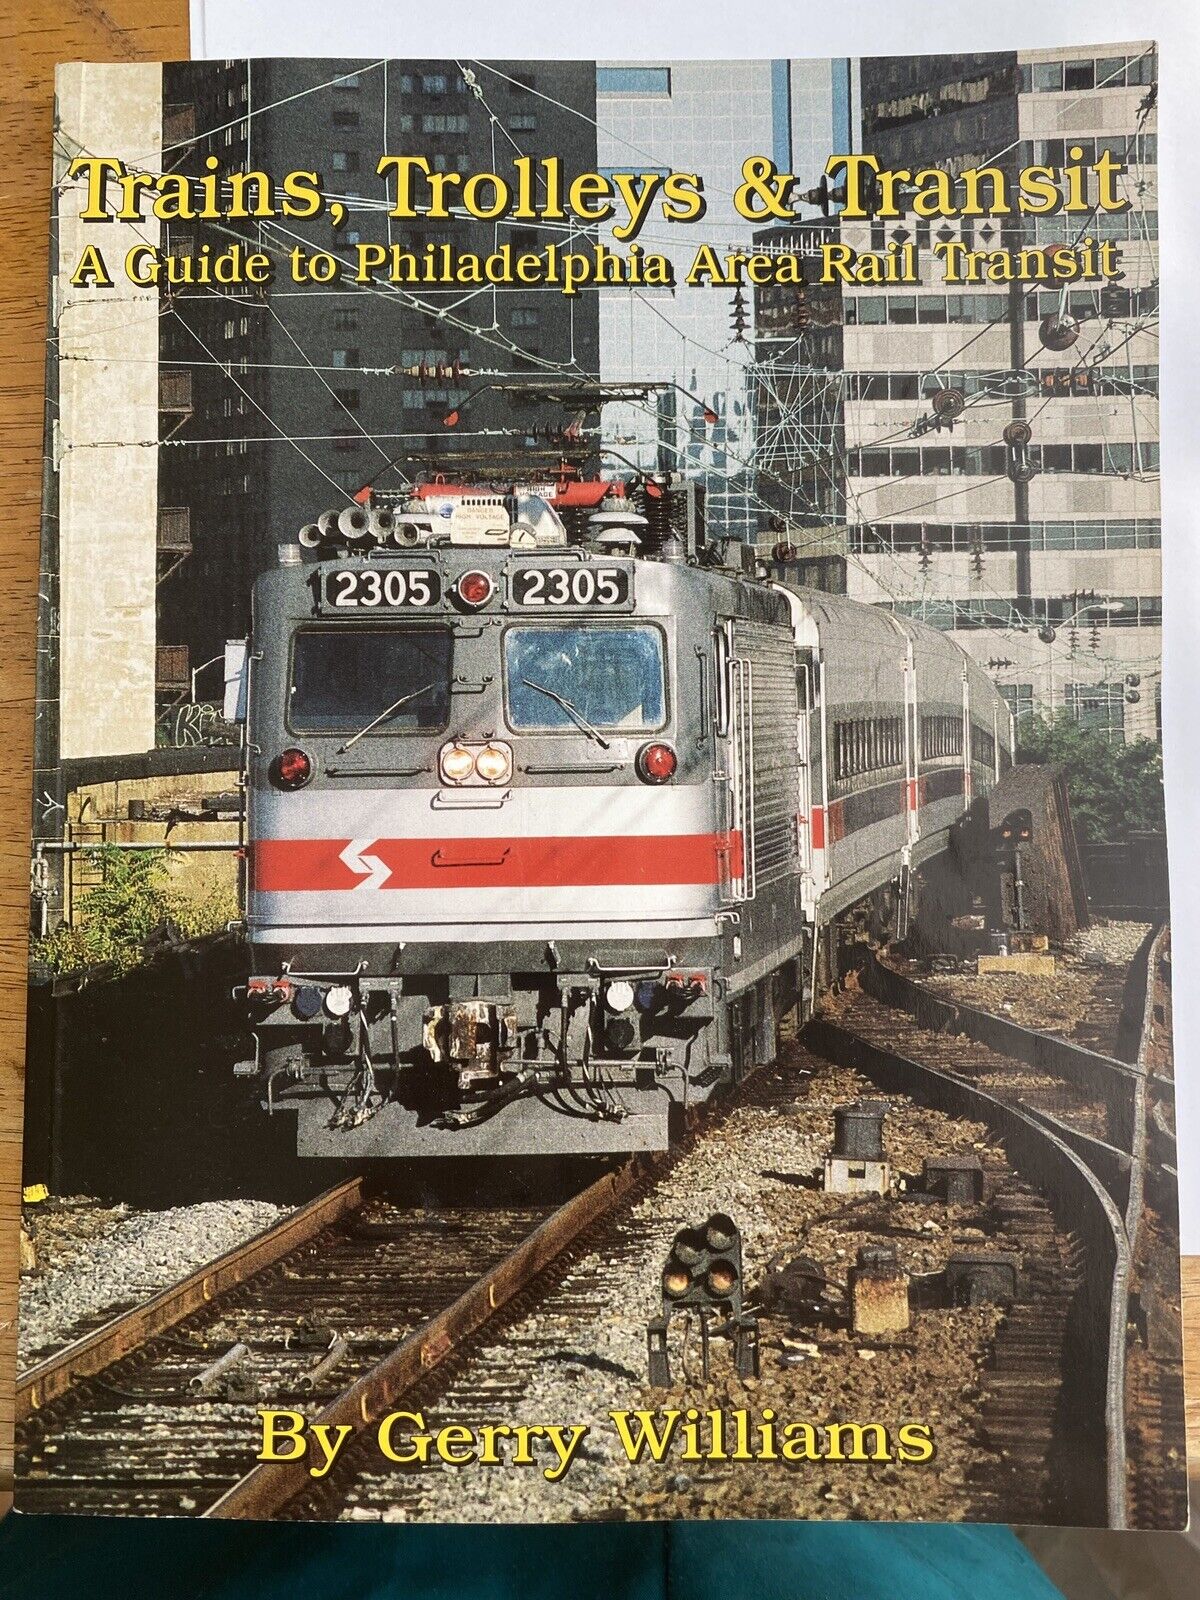 Trains trolleys & transit guide to Philadelphia area Gerry Williams